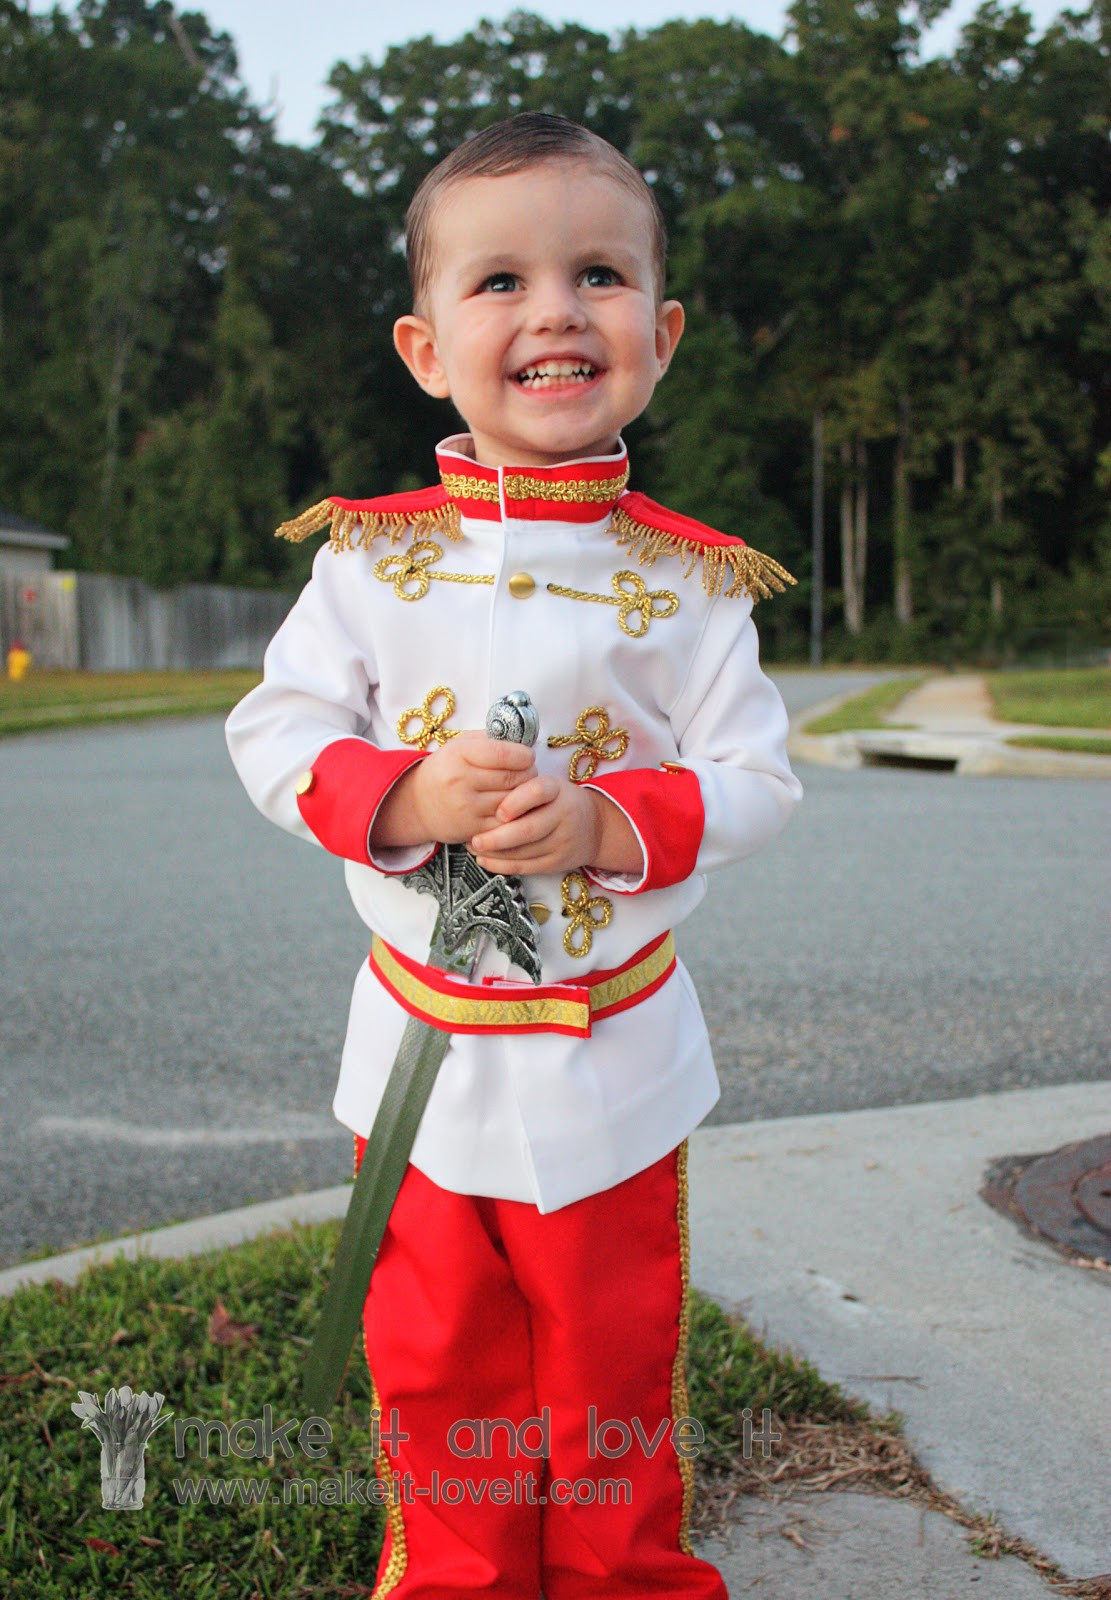 DIY Prince Charming Costume
 Prince Charming Costume Tutorial from Cinderella